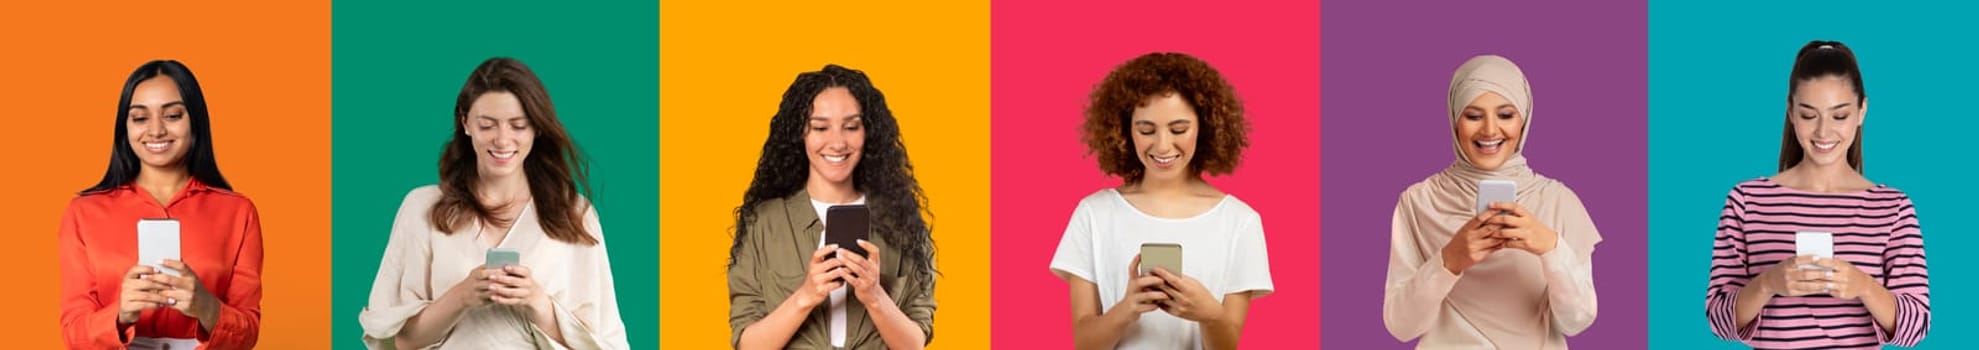 Six smiling women of different ethnicities wearing various outfits interact with smartphones